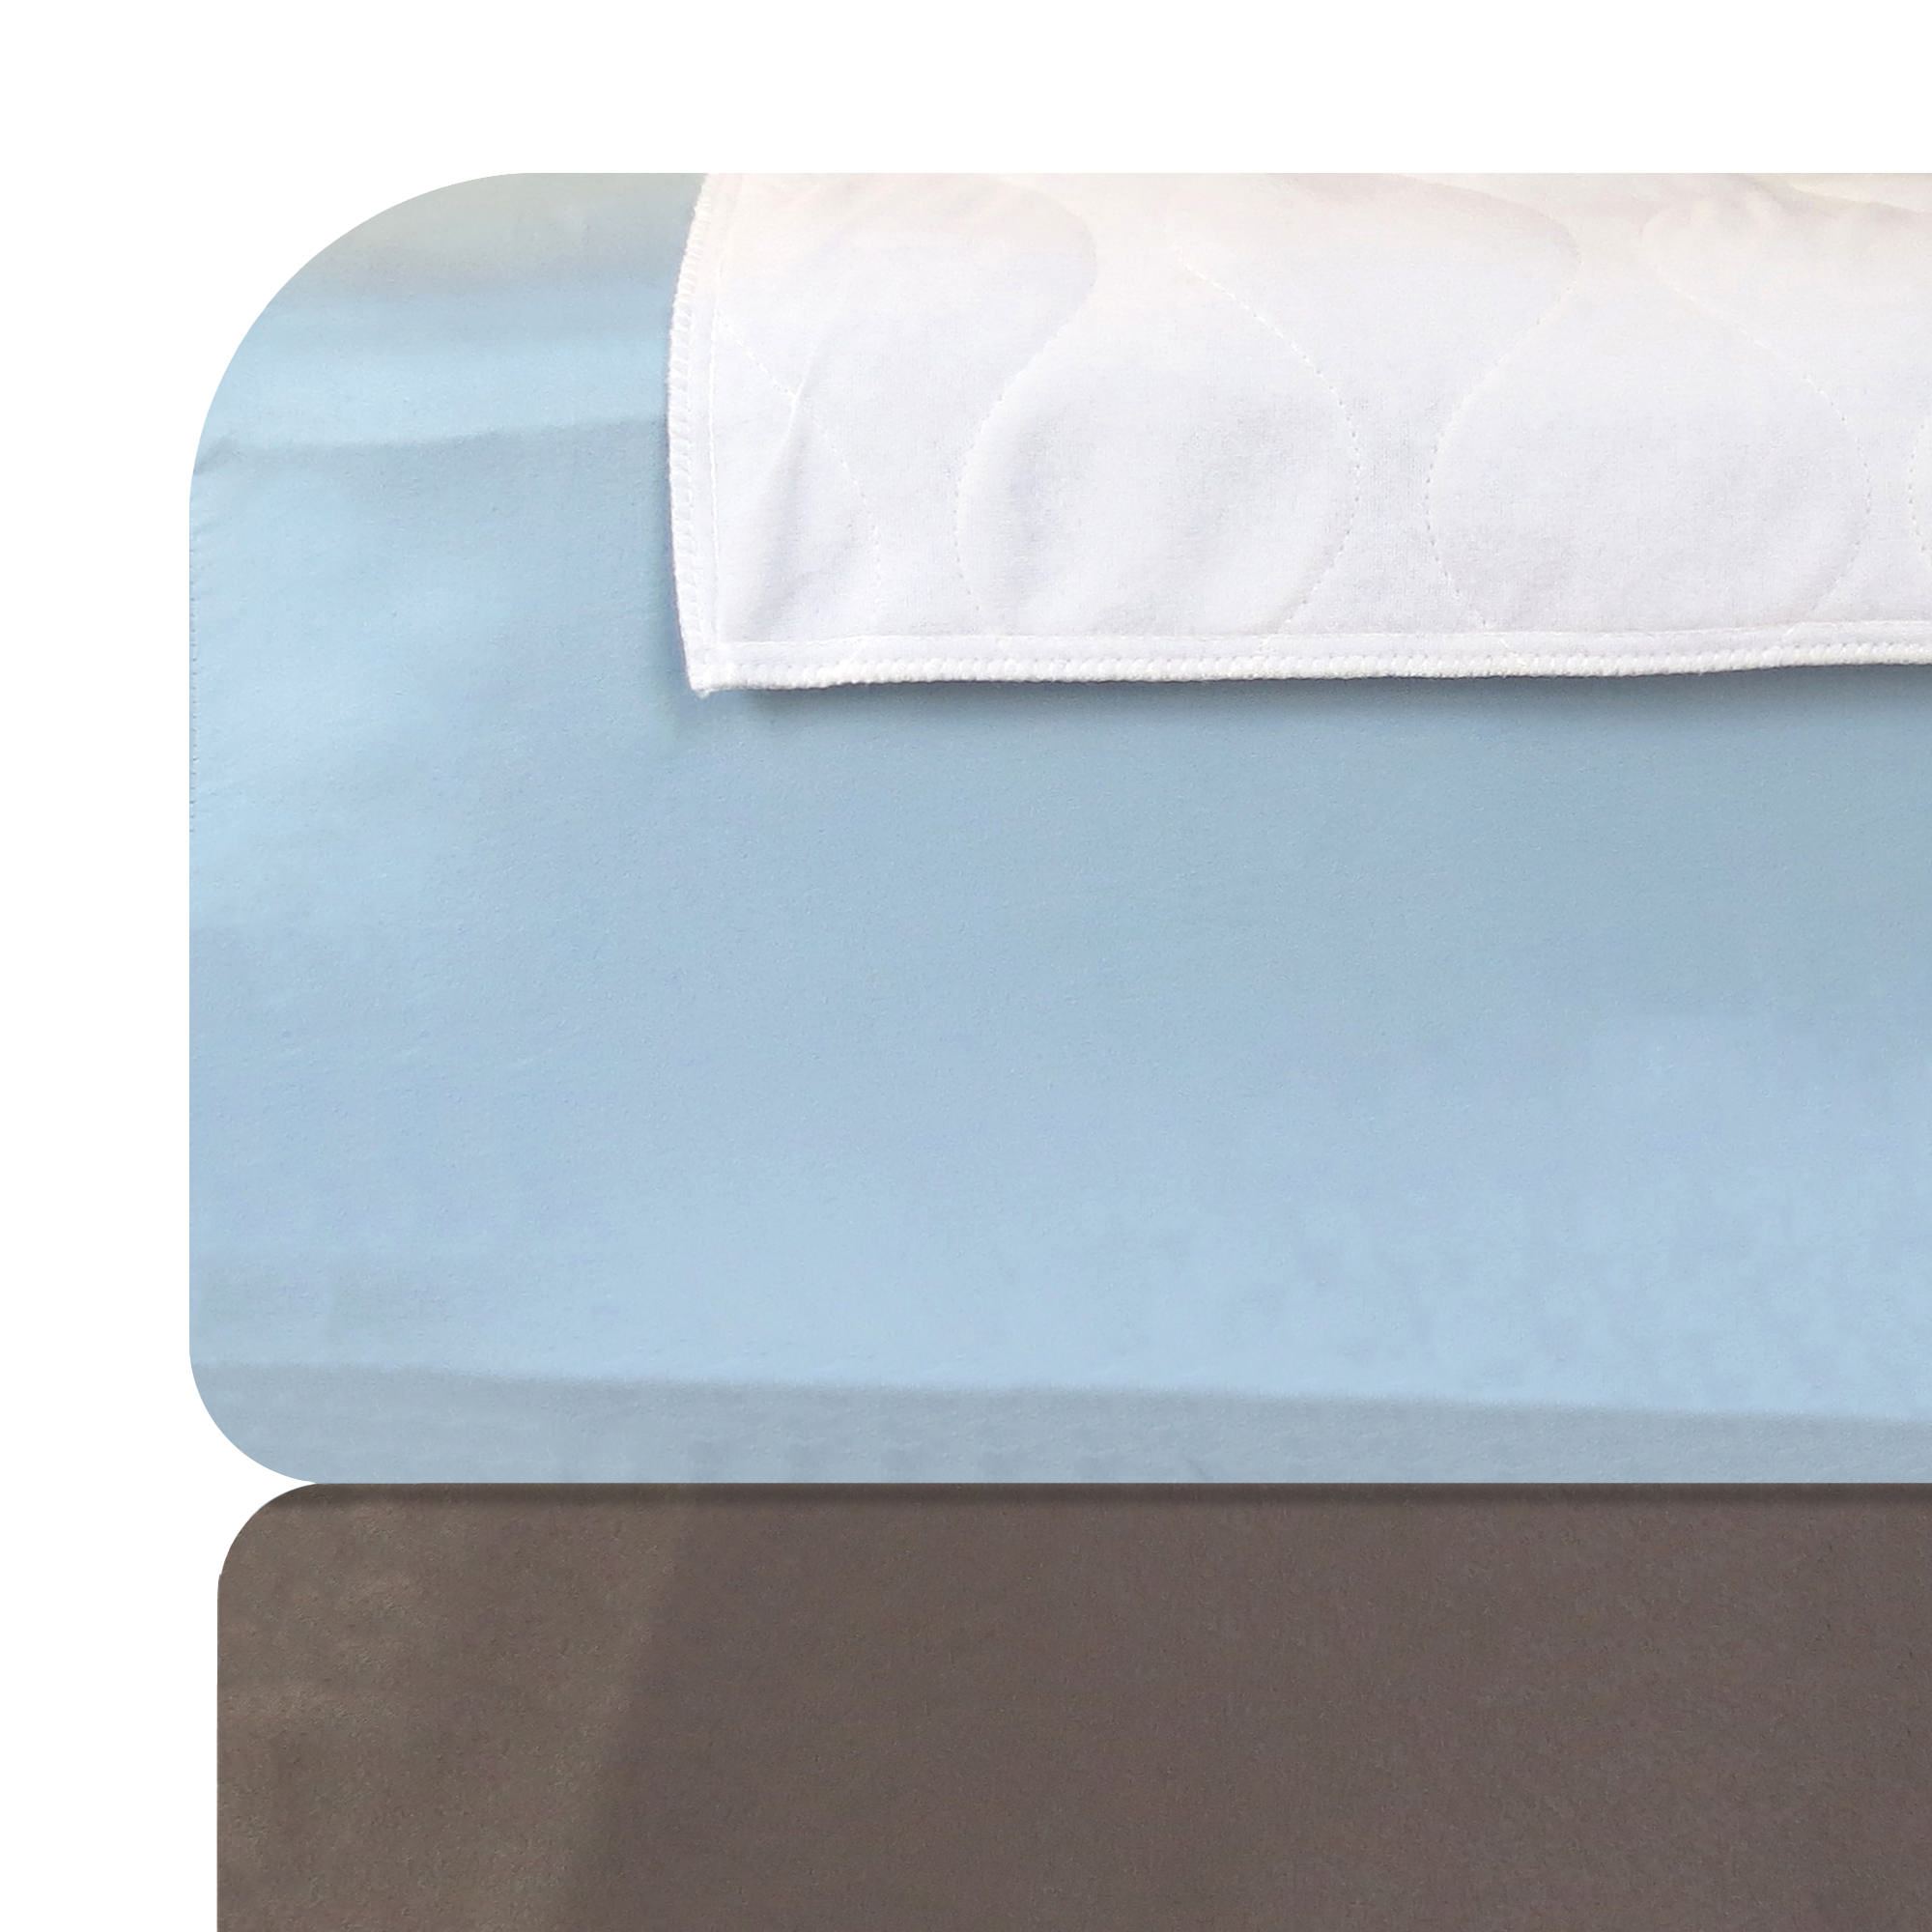 Pack of 2 underpads for quick nighttime changes